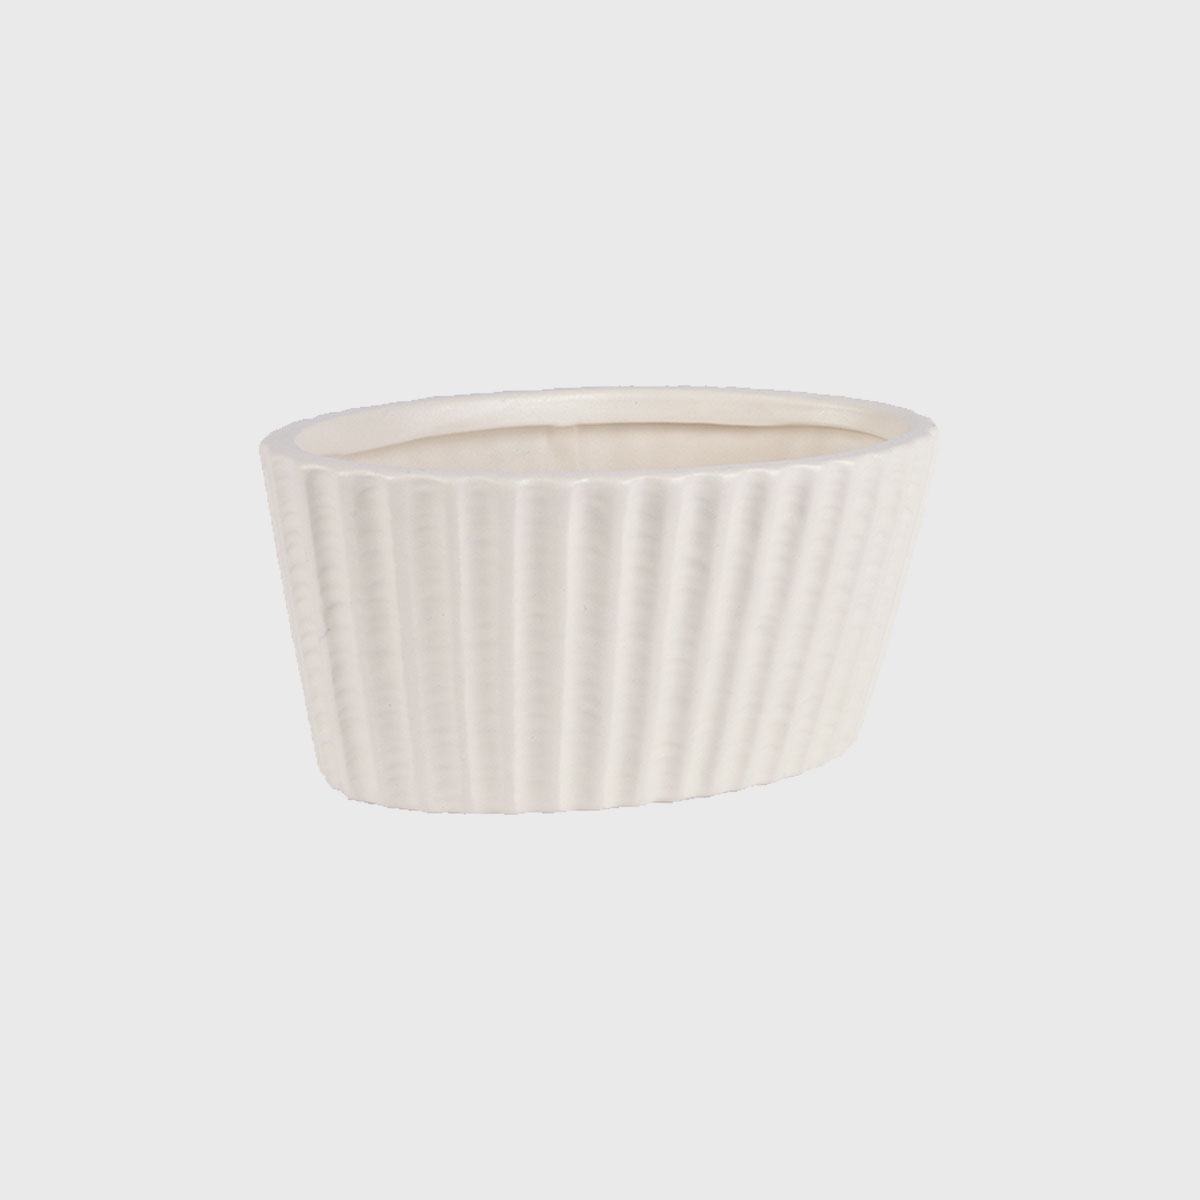 Cachepot oval - creme